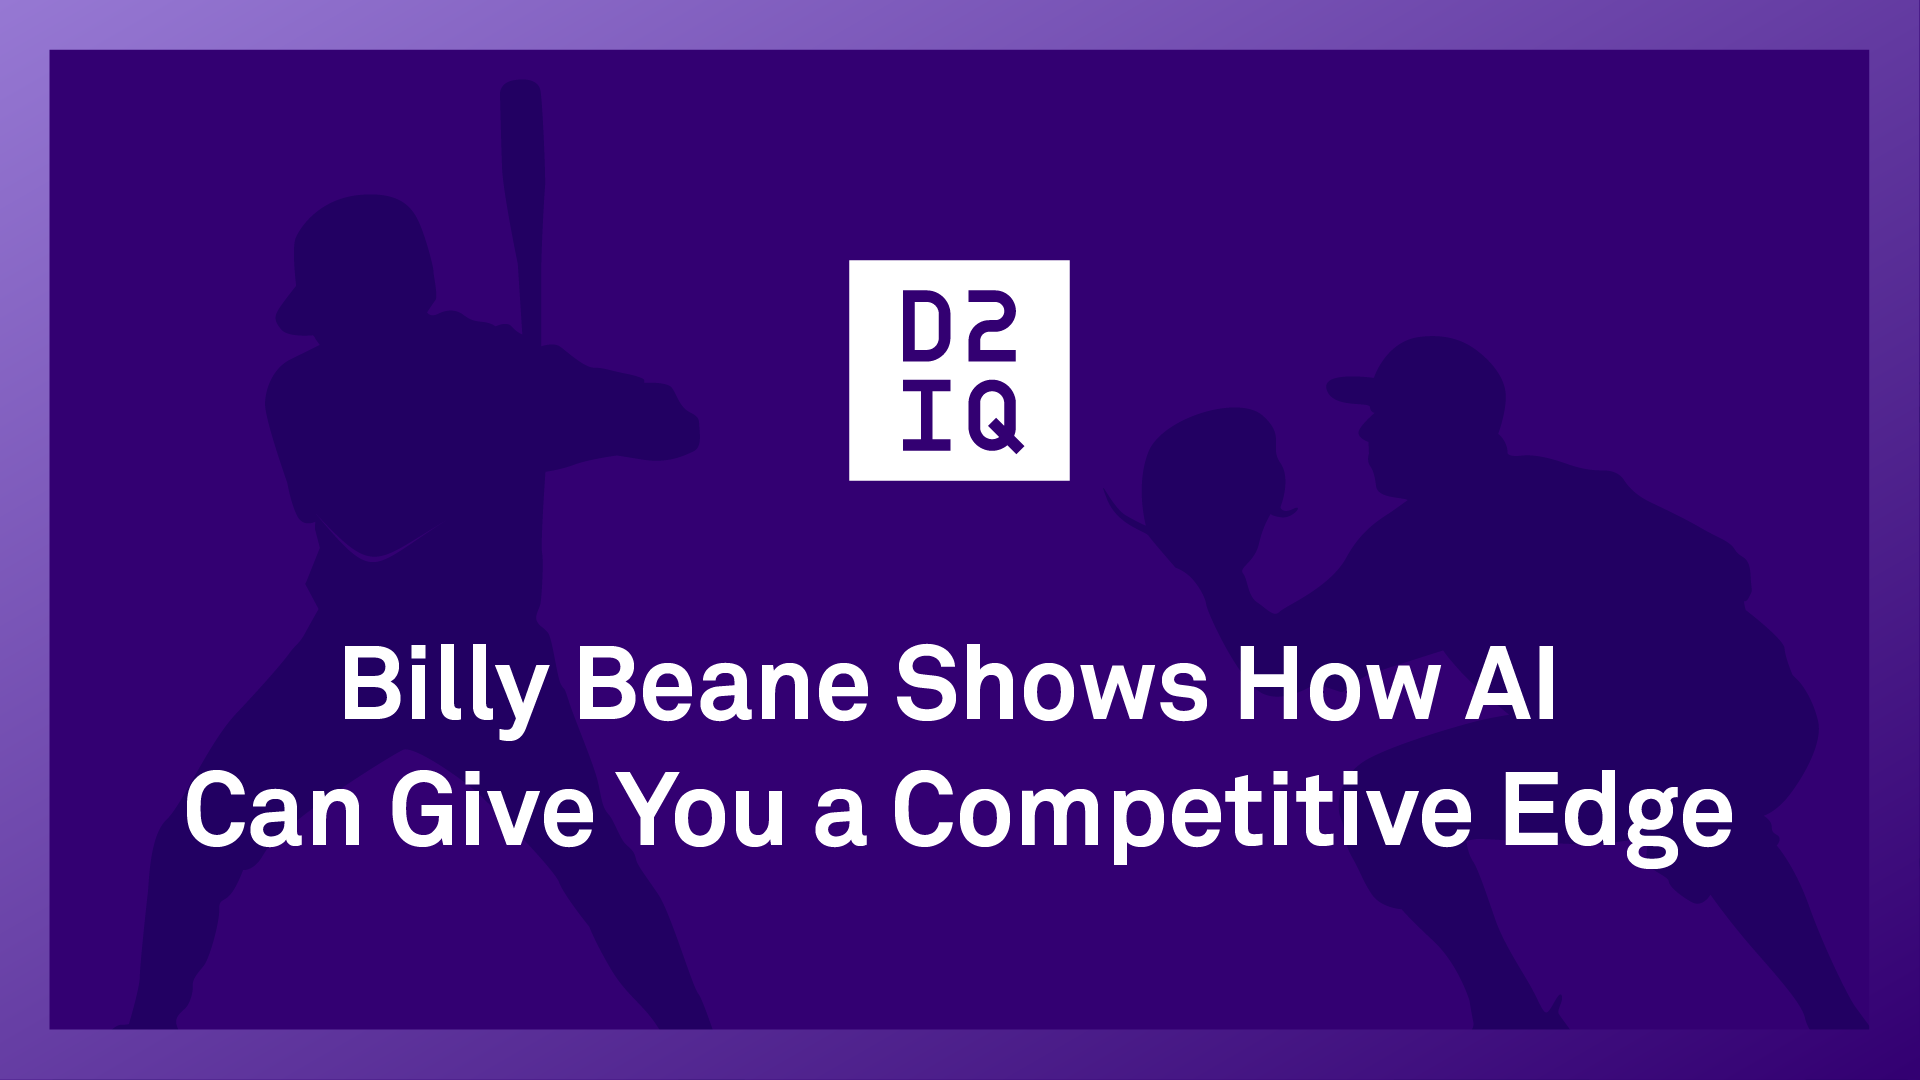 Billy Beane Shows How AI Can Give You a Competitive Edge